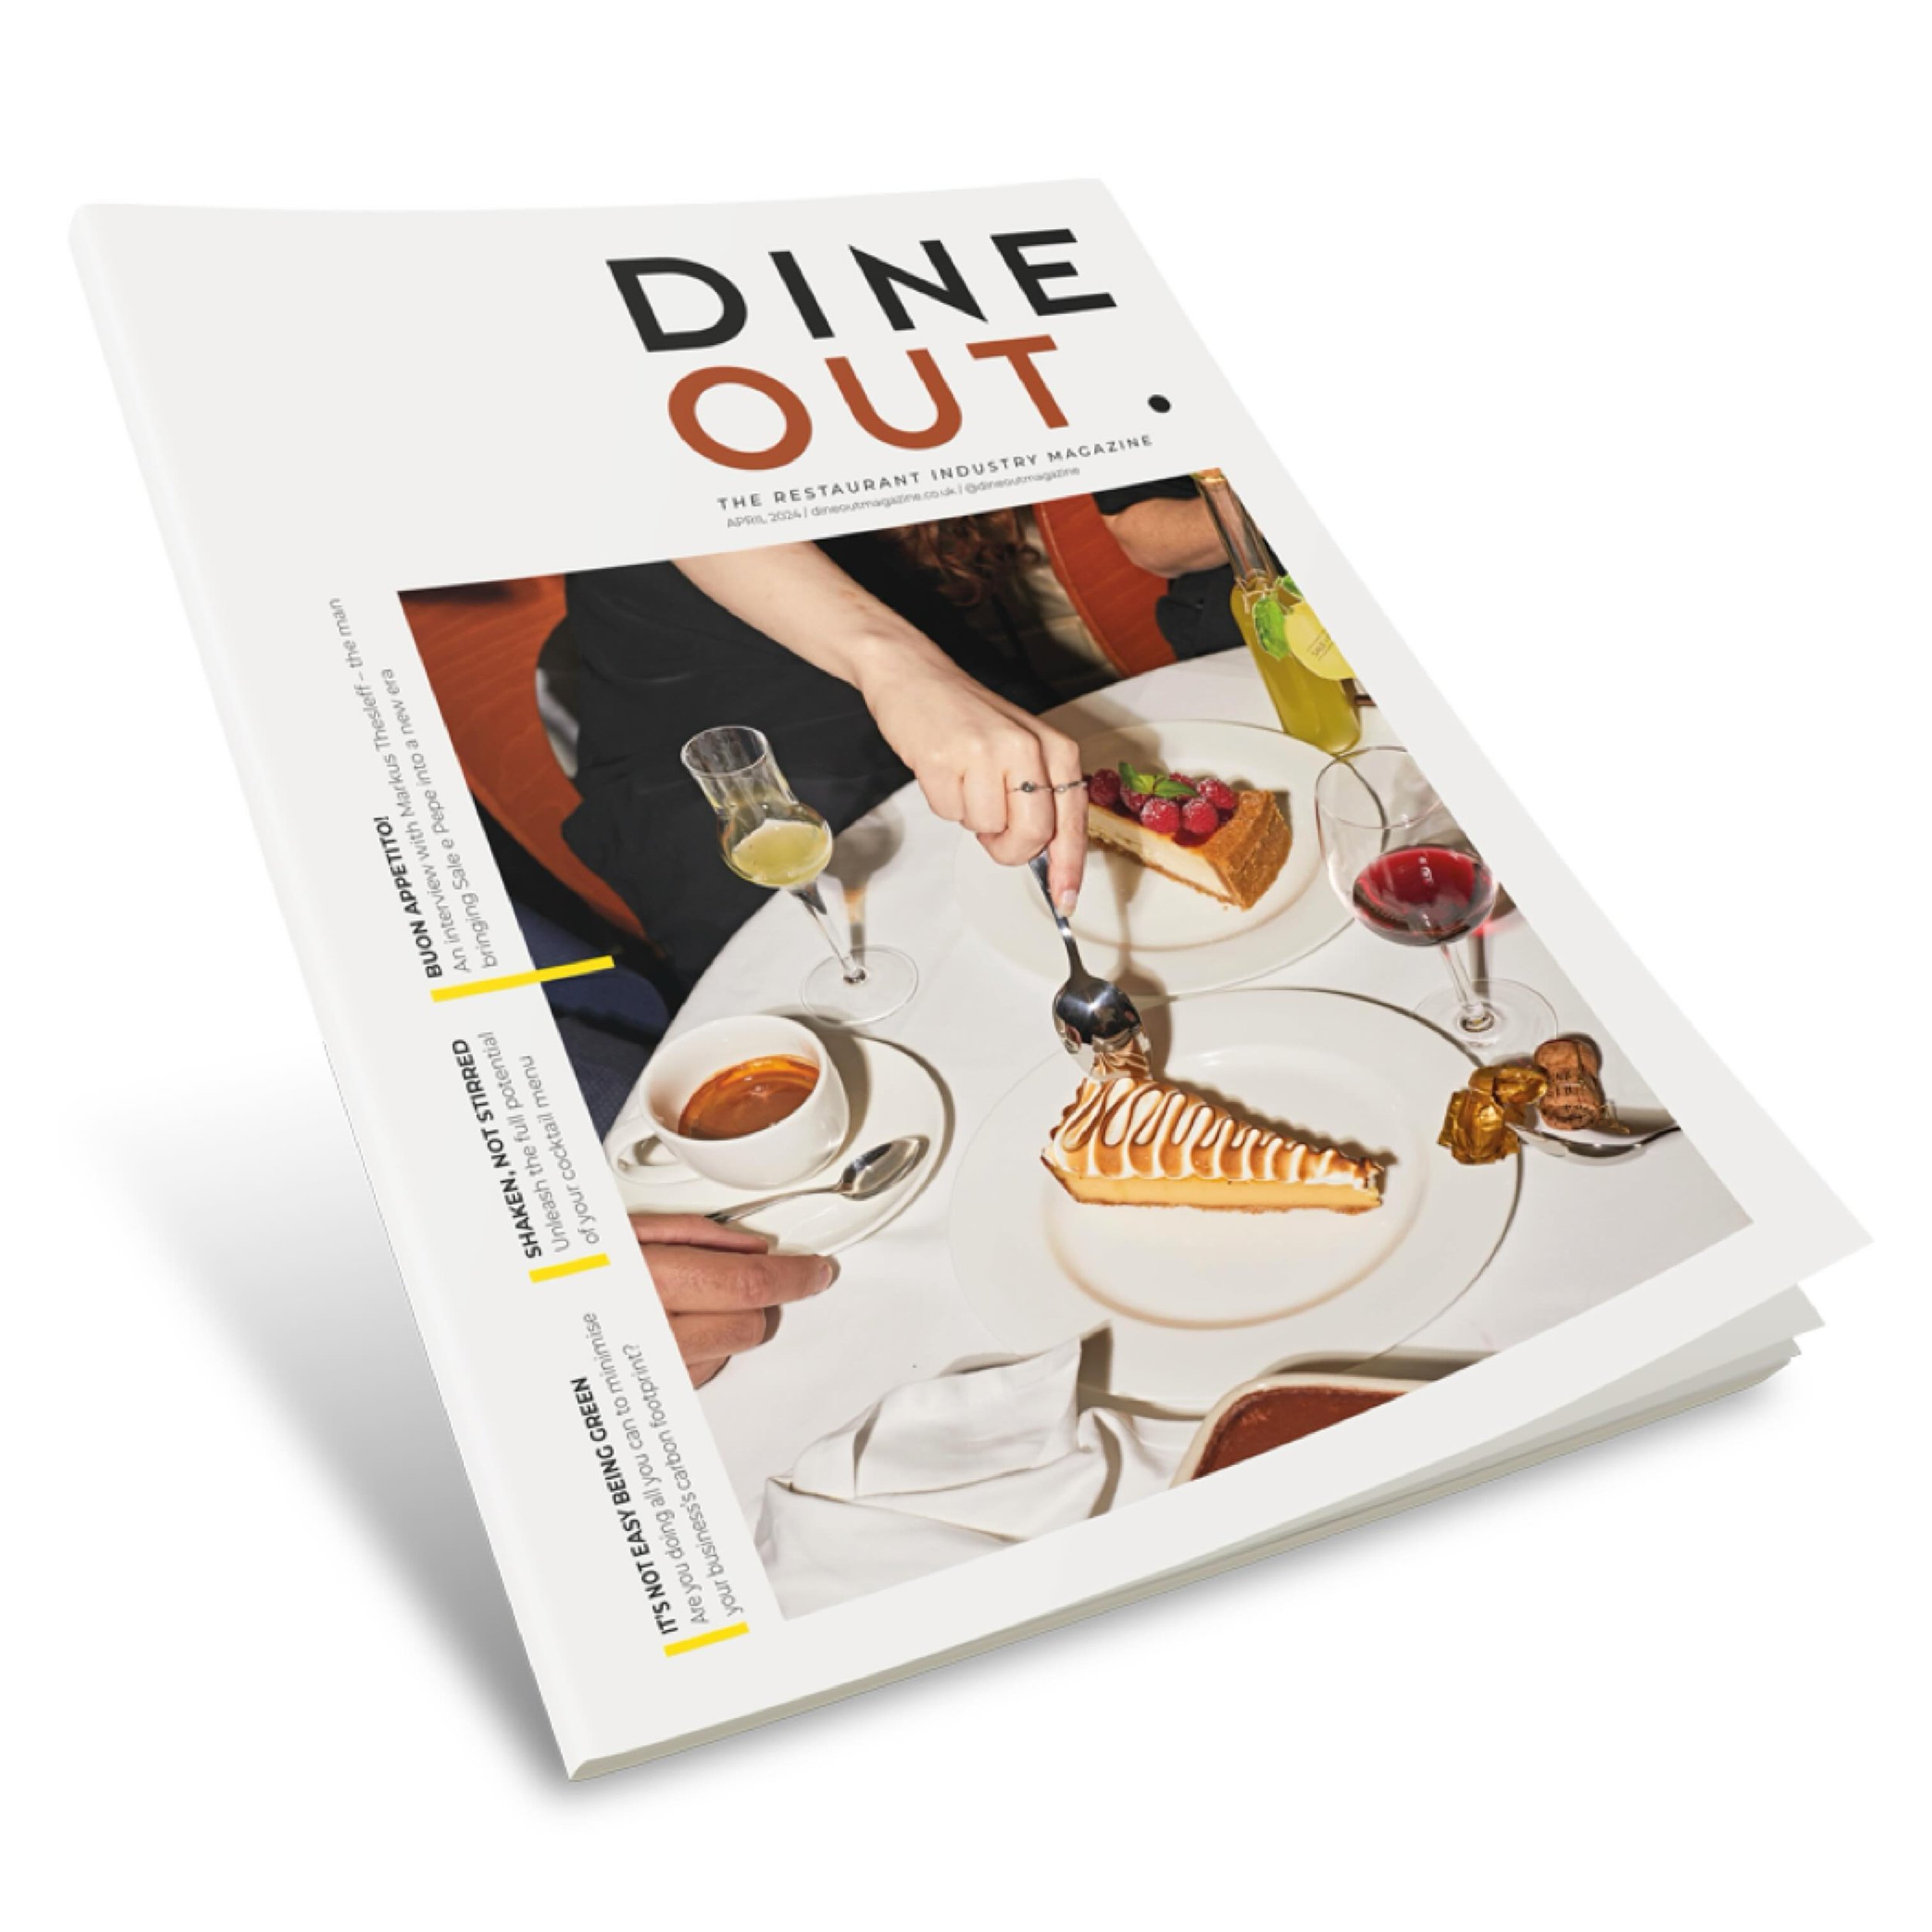 @dineoutmagazine is the only monthly printed magazine exclusively for the UK restaurant industry. Printed and digital copies are sent to over 40,000 senior contacts across multi-site and independent operators.

Read your latest issue here - dineoutma